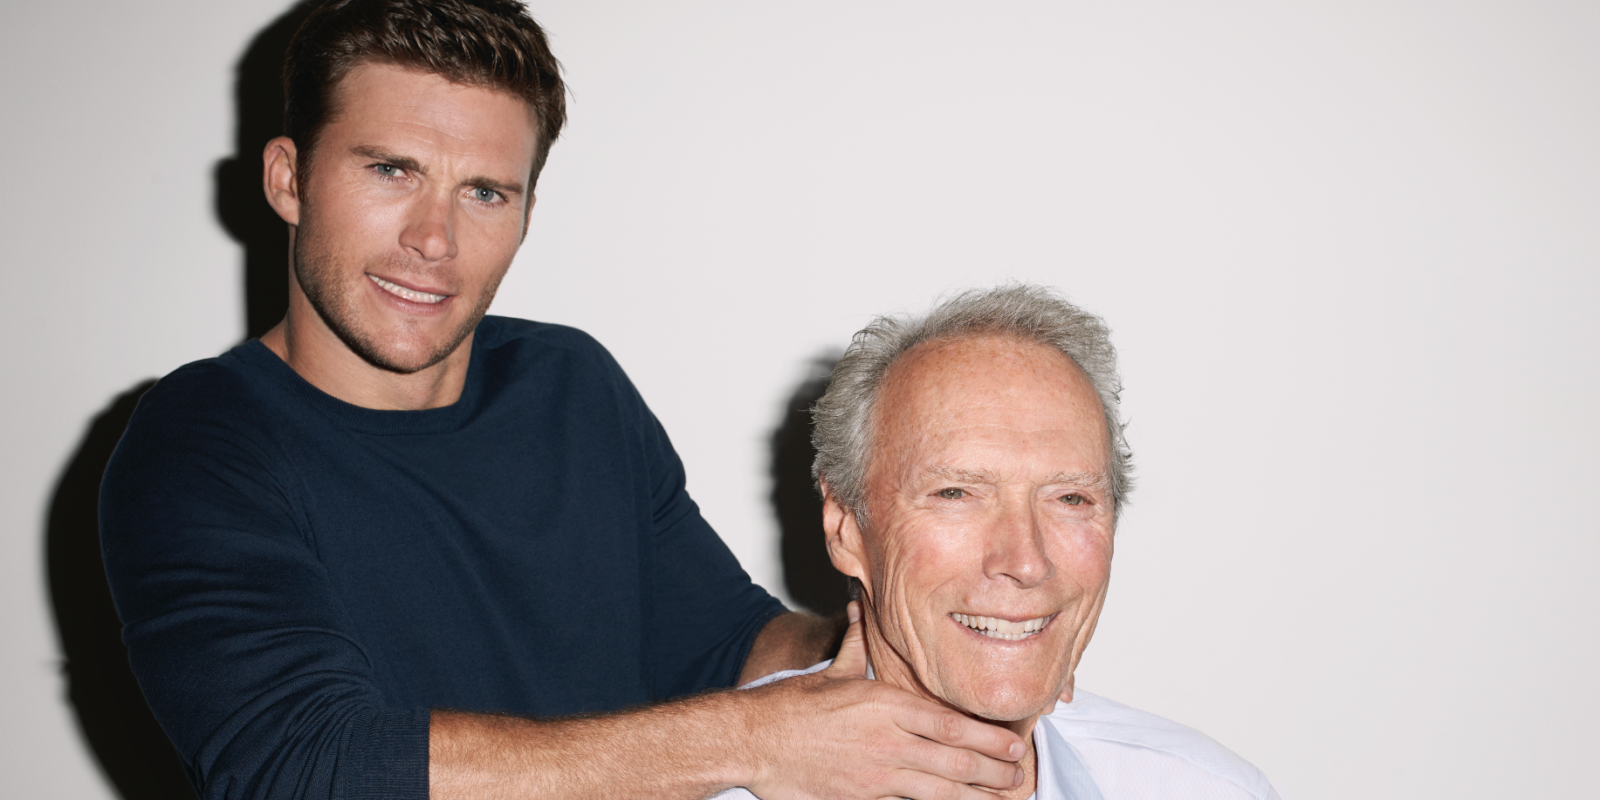 Clint and Scott Eastwood No Holds Barred in Their First Interview Together